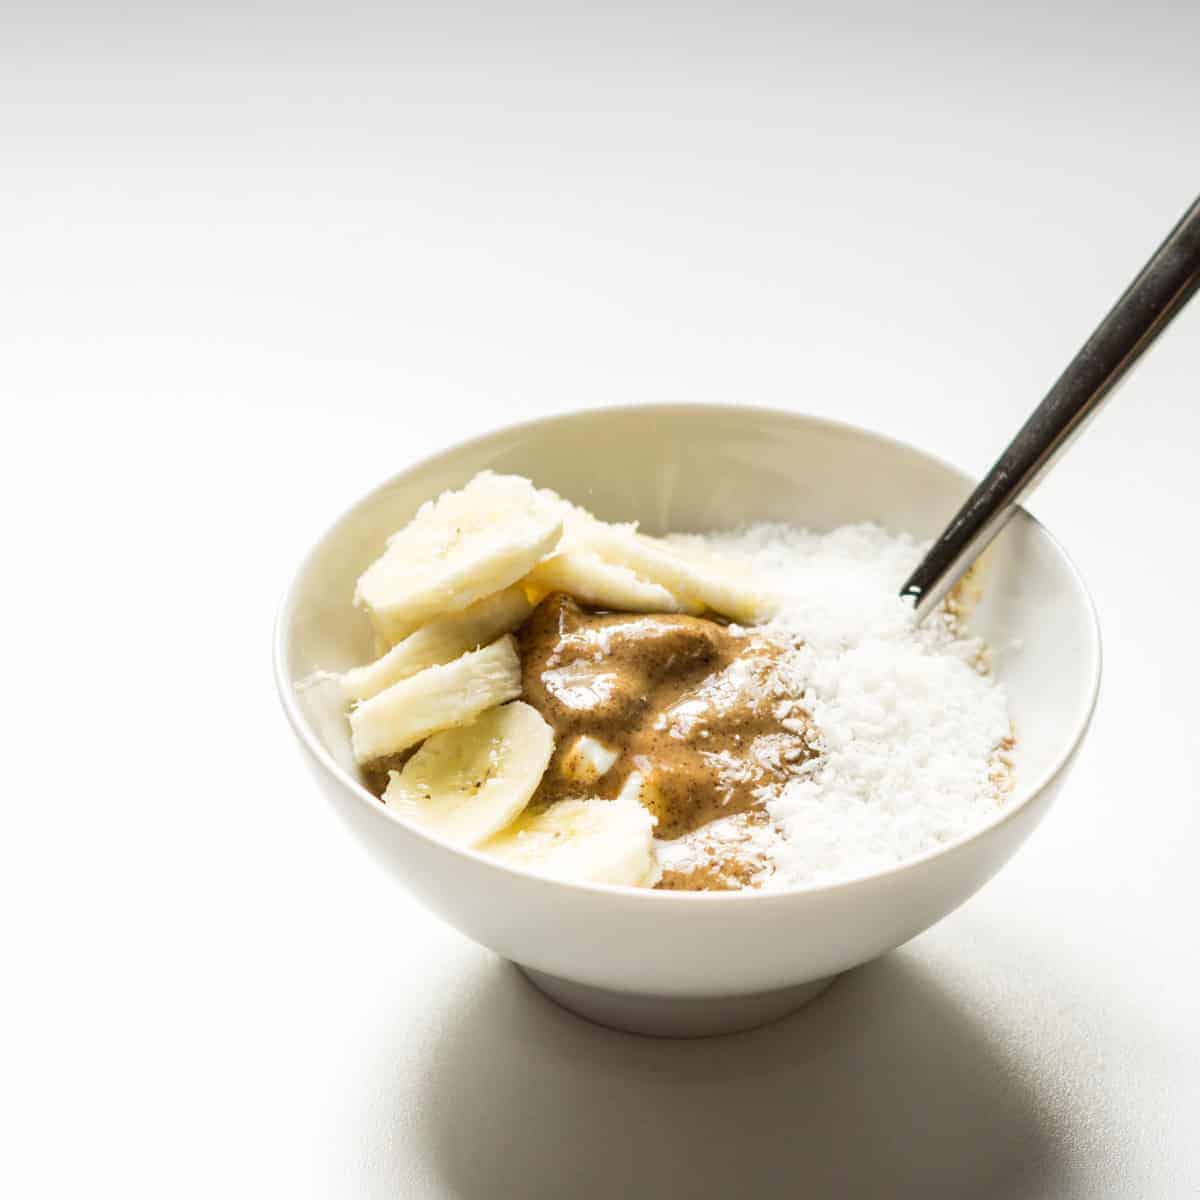 low sugar yogurt with bananas, almond butter, and coconut